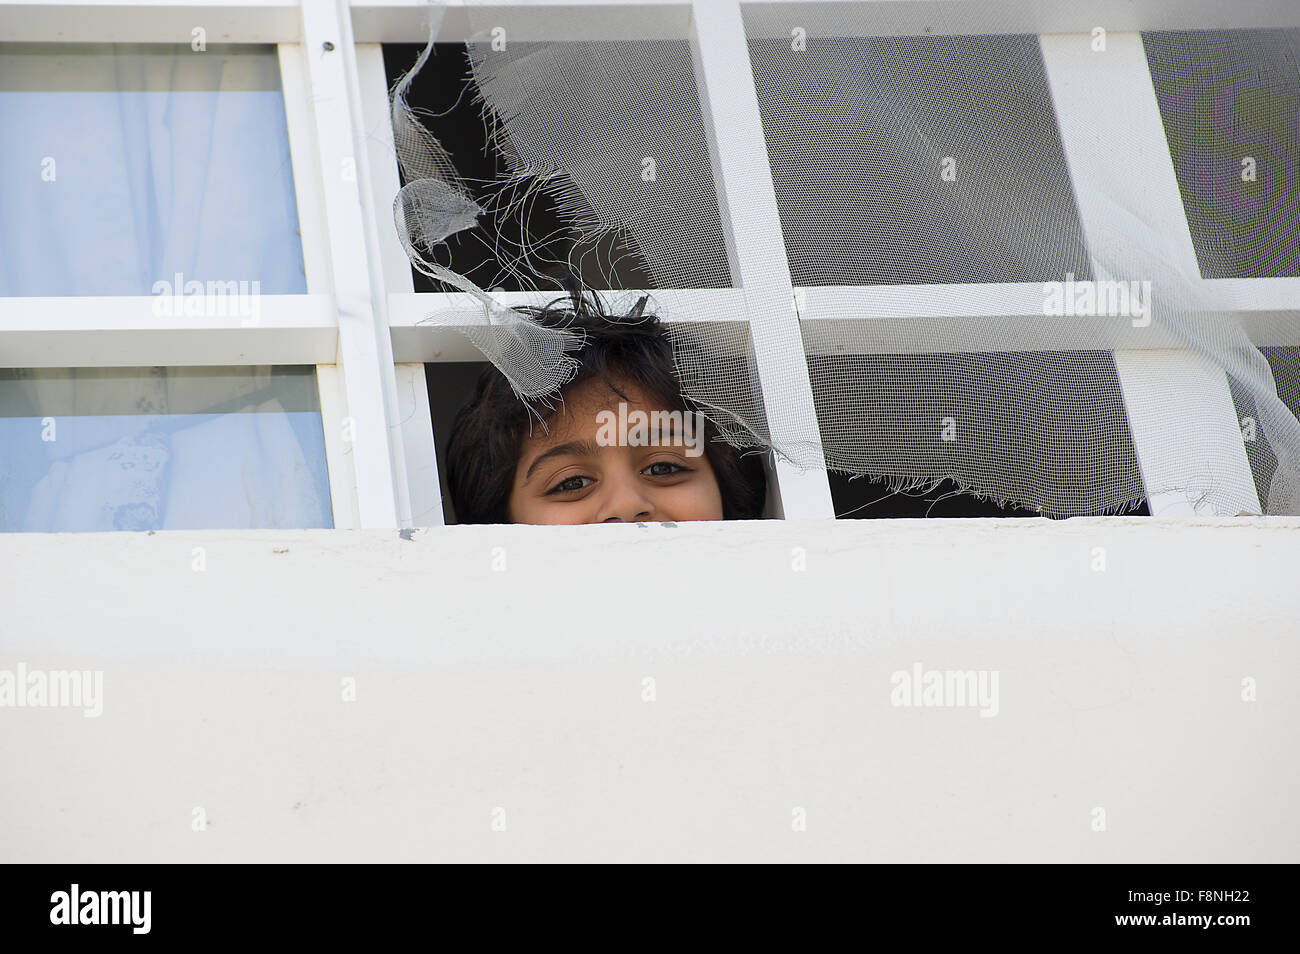 Boy in Oman hand peers with a smile out of a window with torn screens Stock Photo